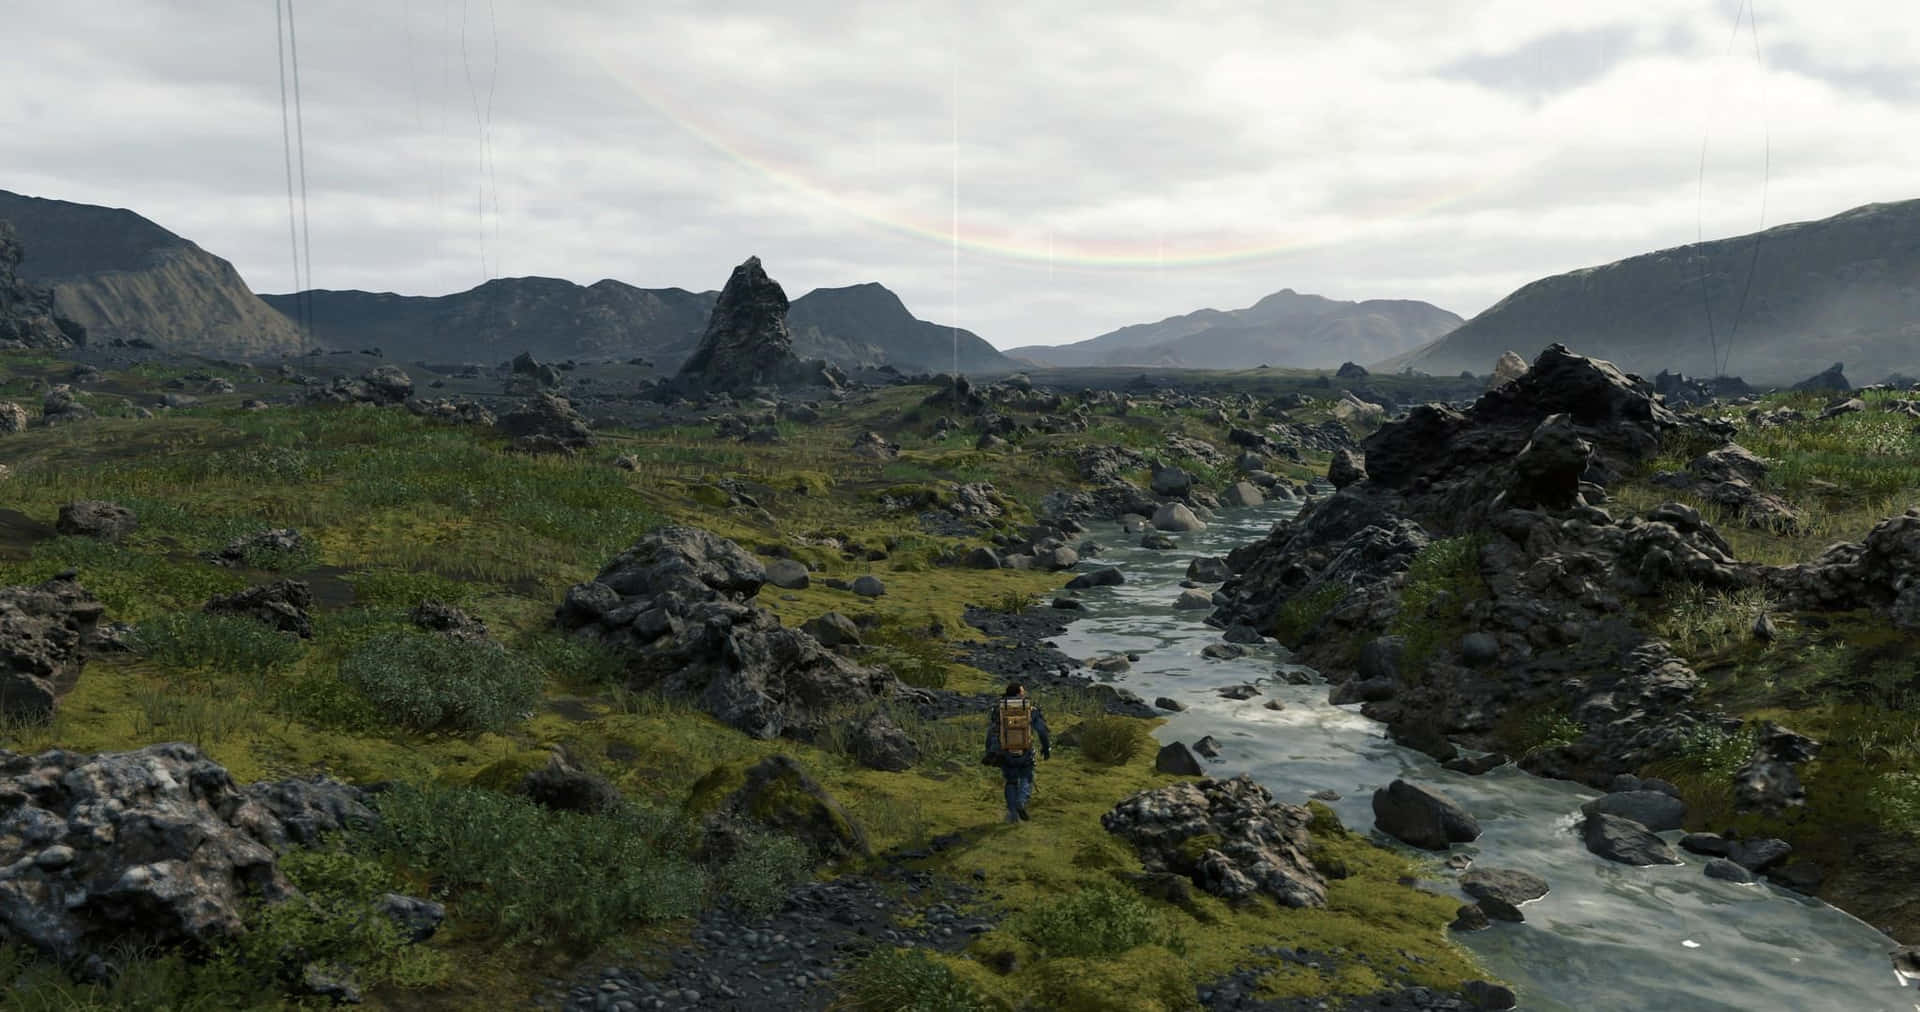 'Explore a mysterious post-apocalyptic landscape in Death Stranding'